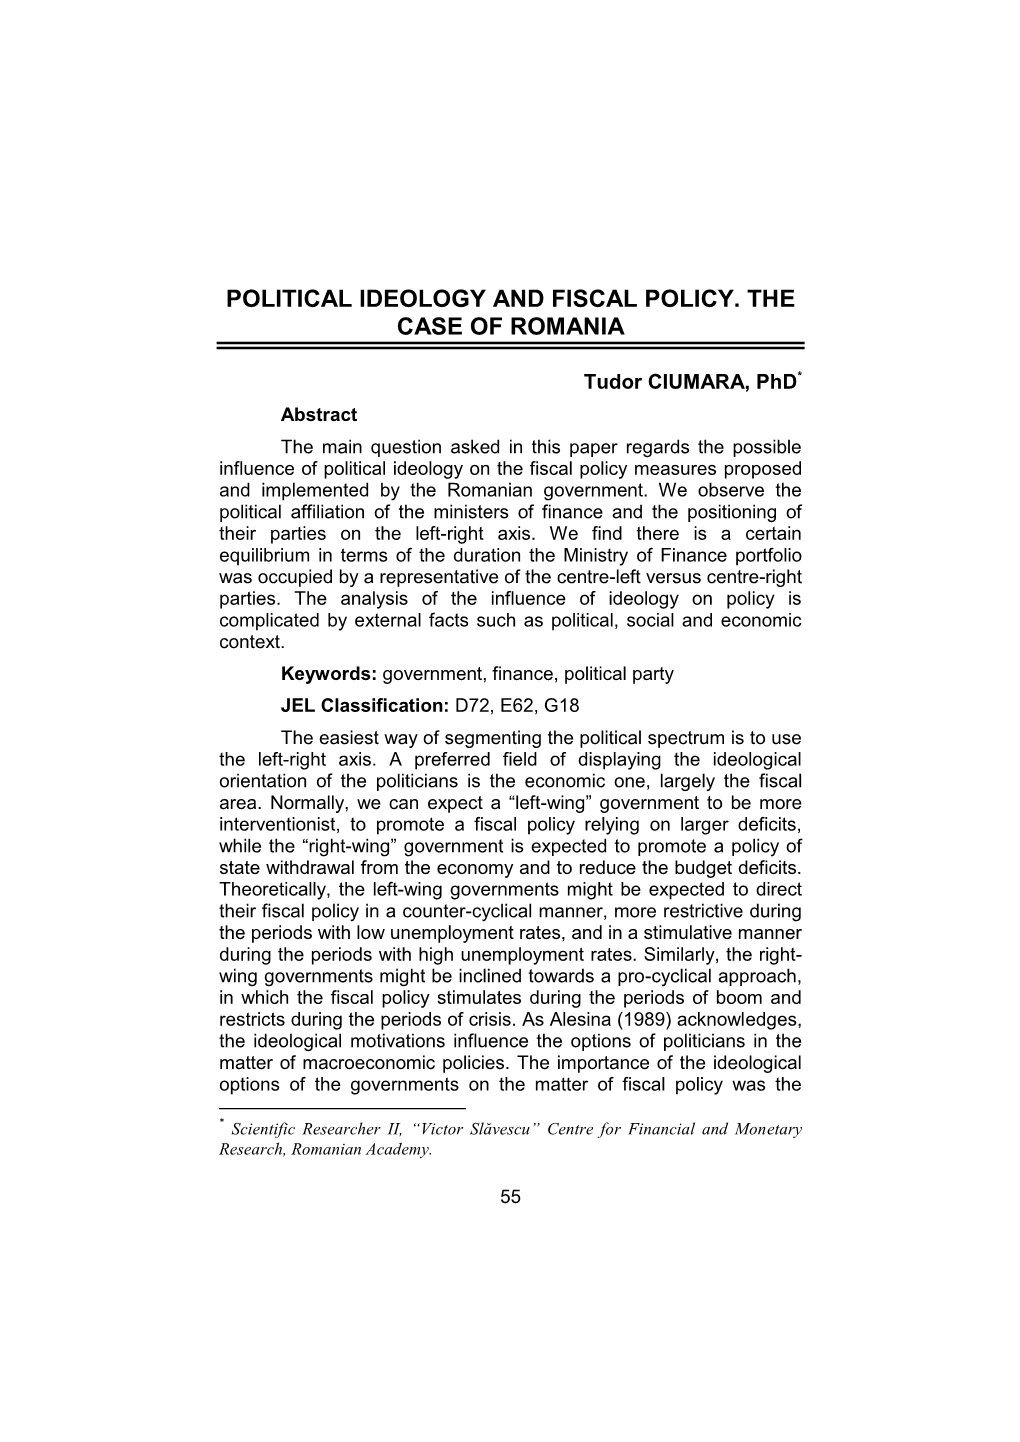 Political Ideology and Fiscal Policy. the Case of Romania